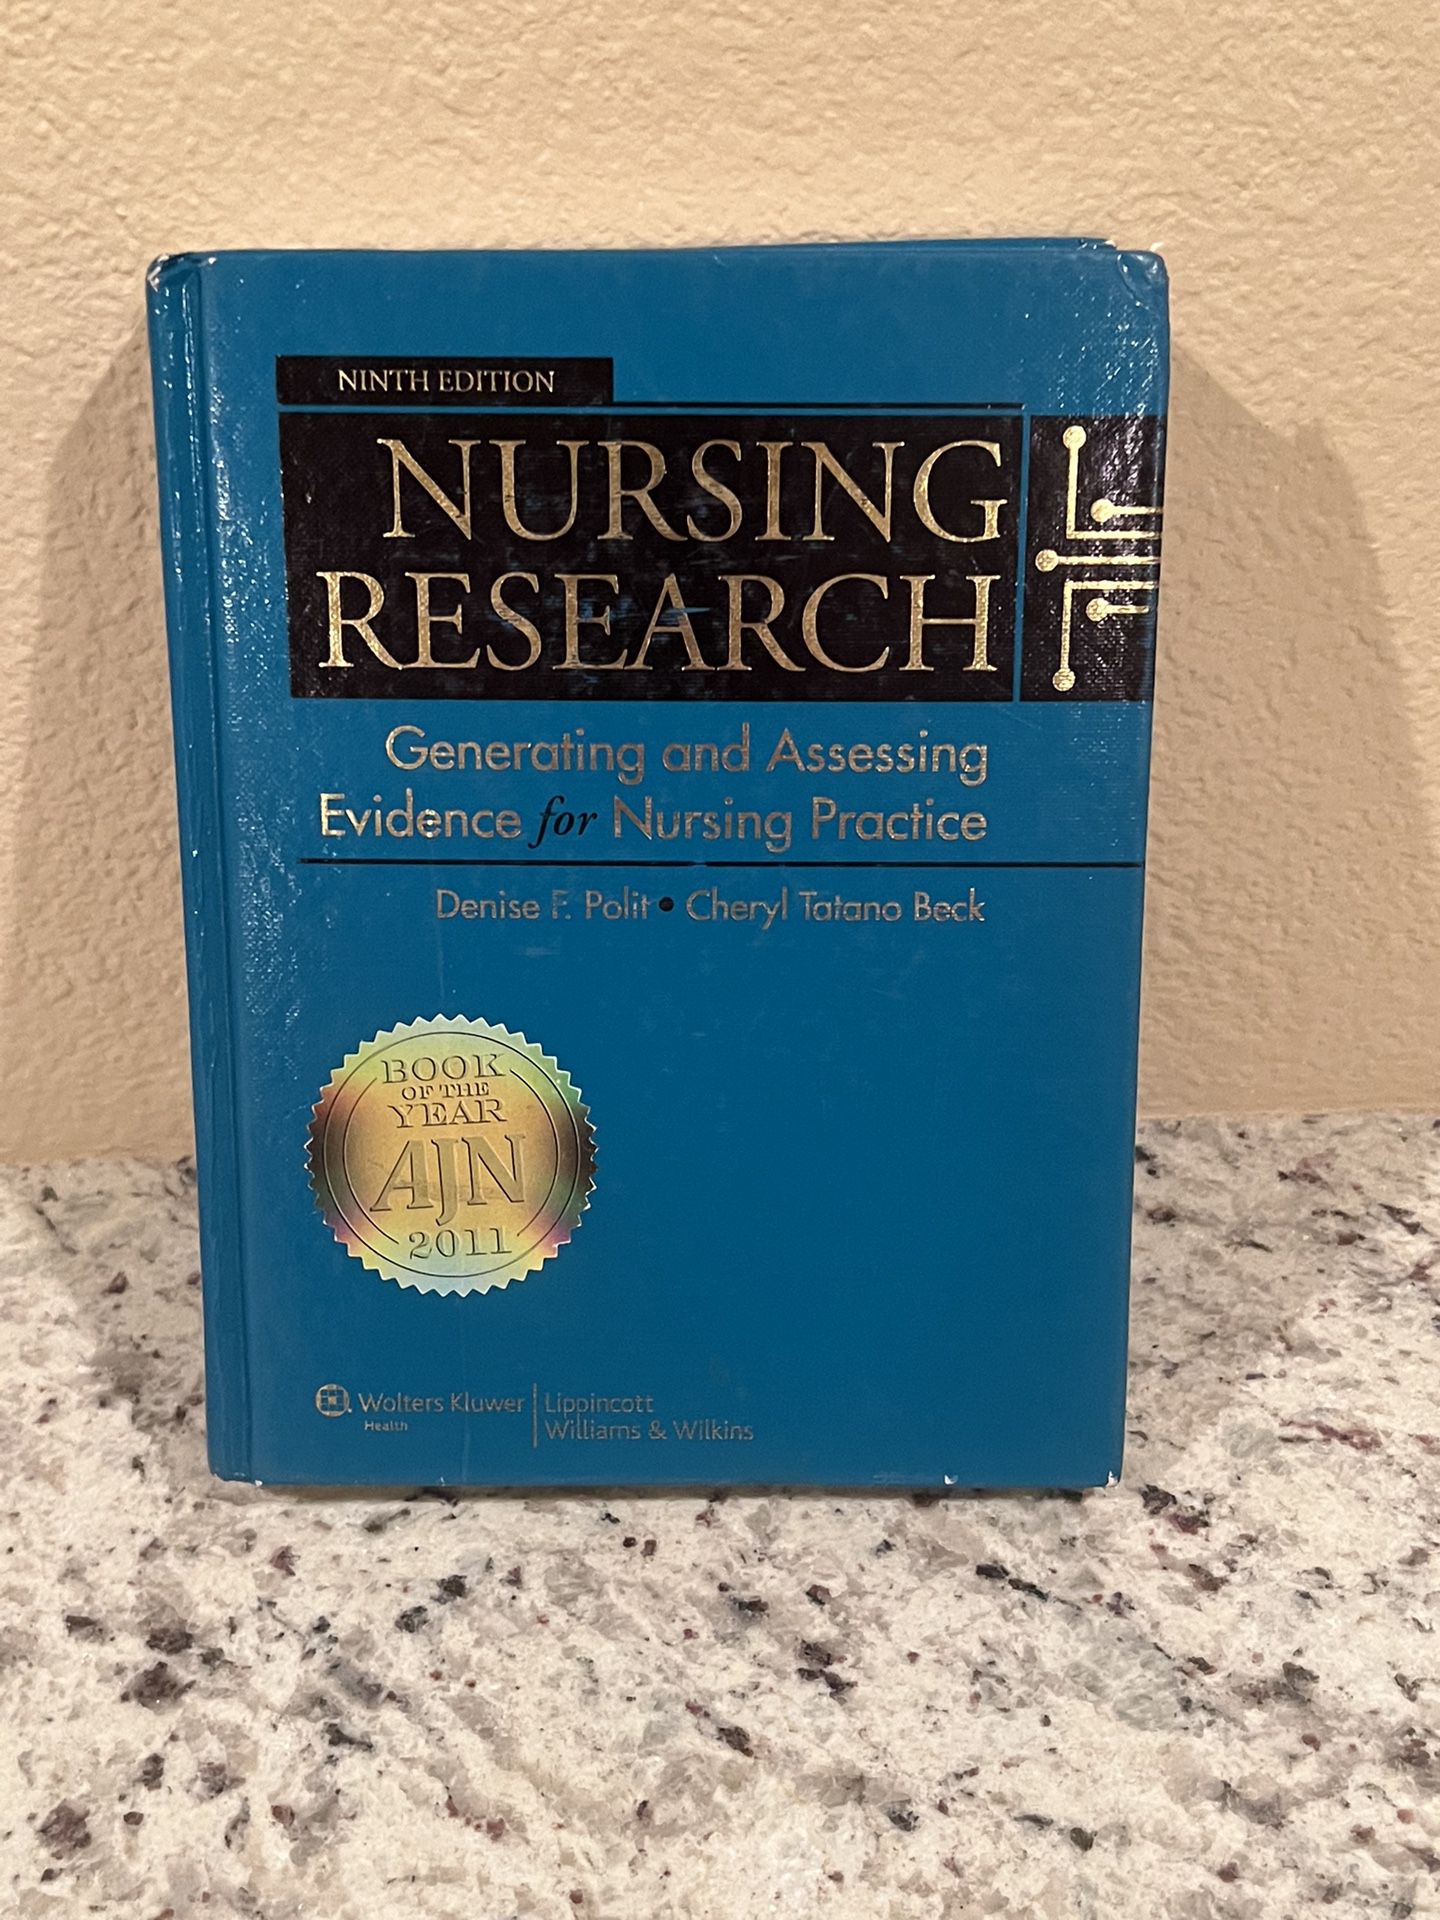 Nursing　Nursing　for　San　Evidence　in　Sale　CA　9th　Research　Practice　For　Jacinto,　Generating　OfferUp　Assessing　Edition